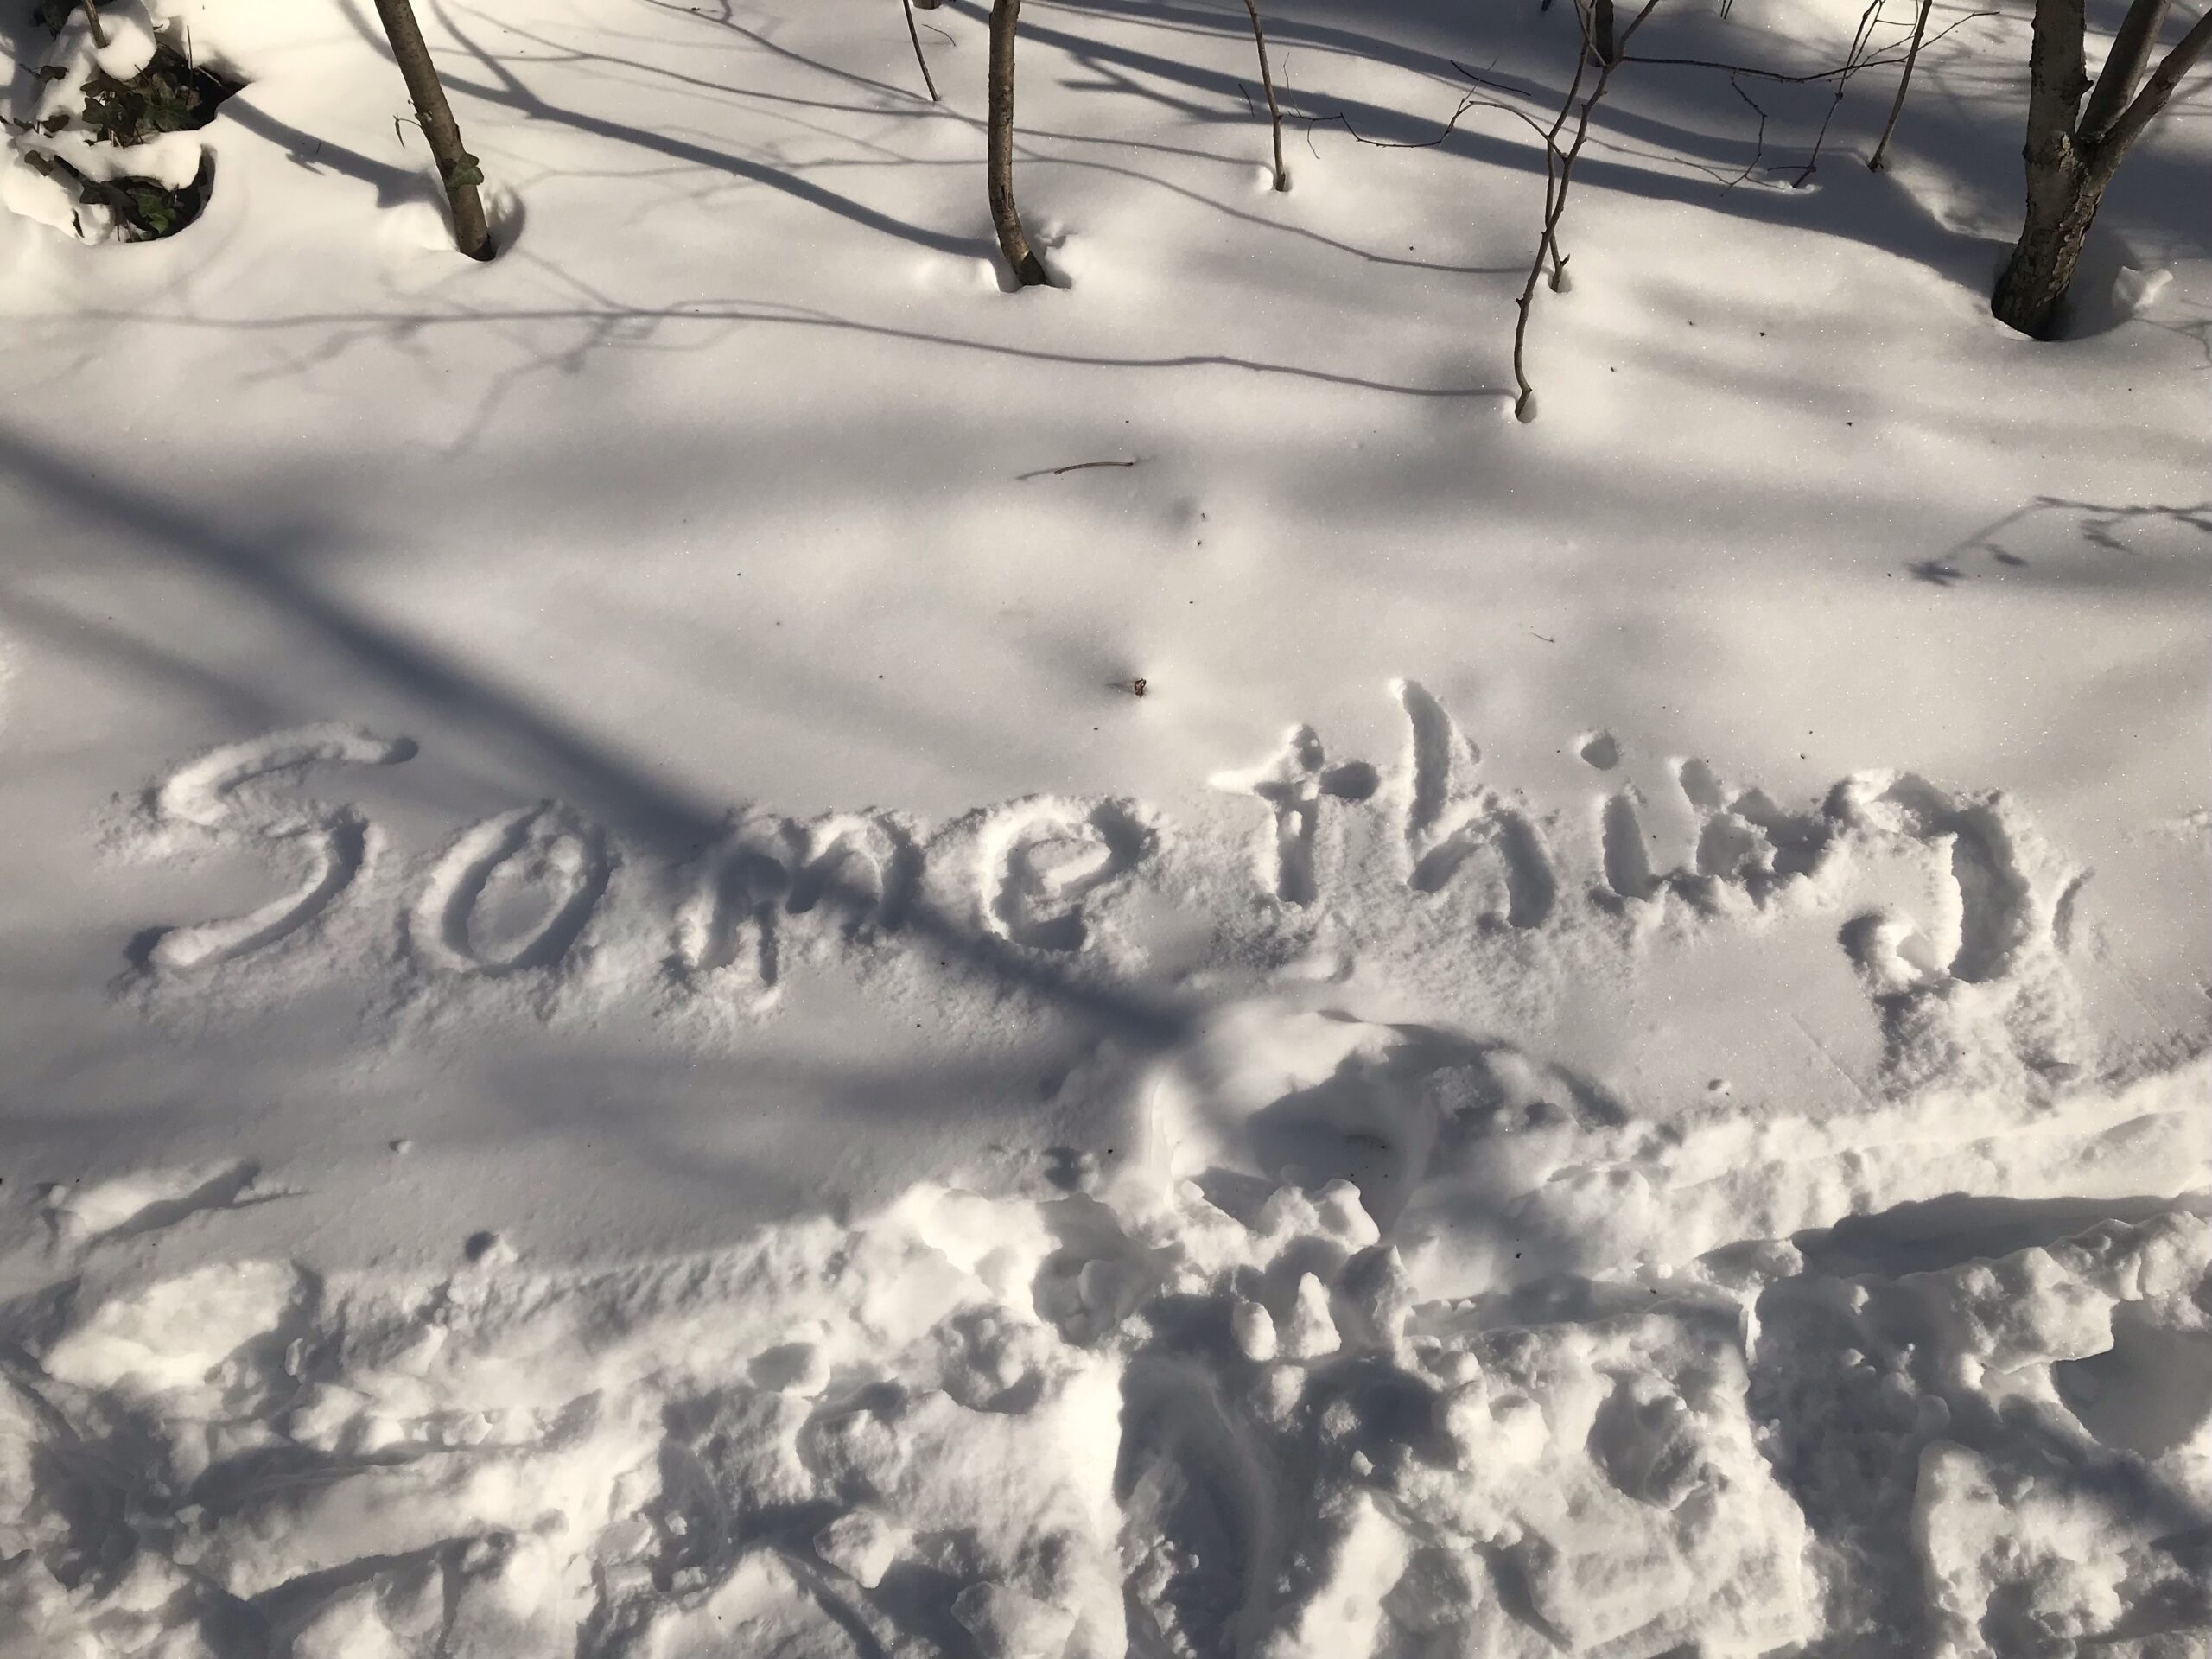 The word "something" written in the snow